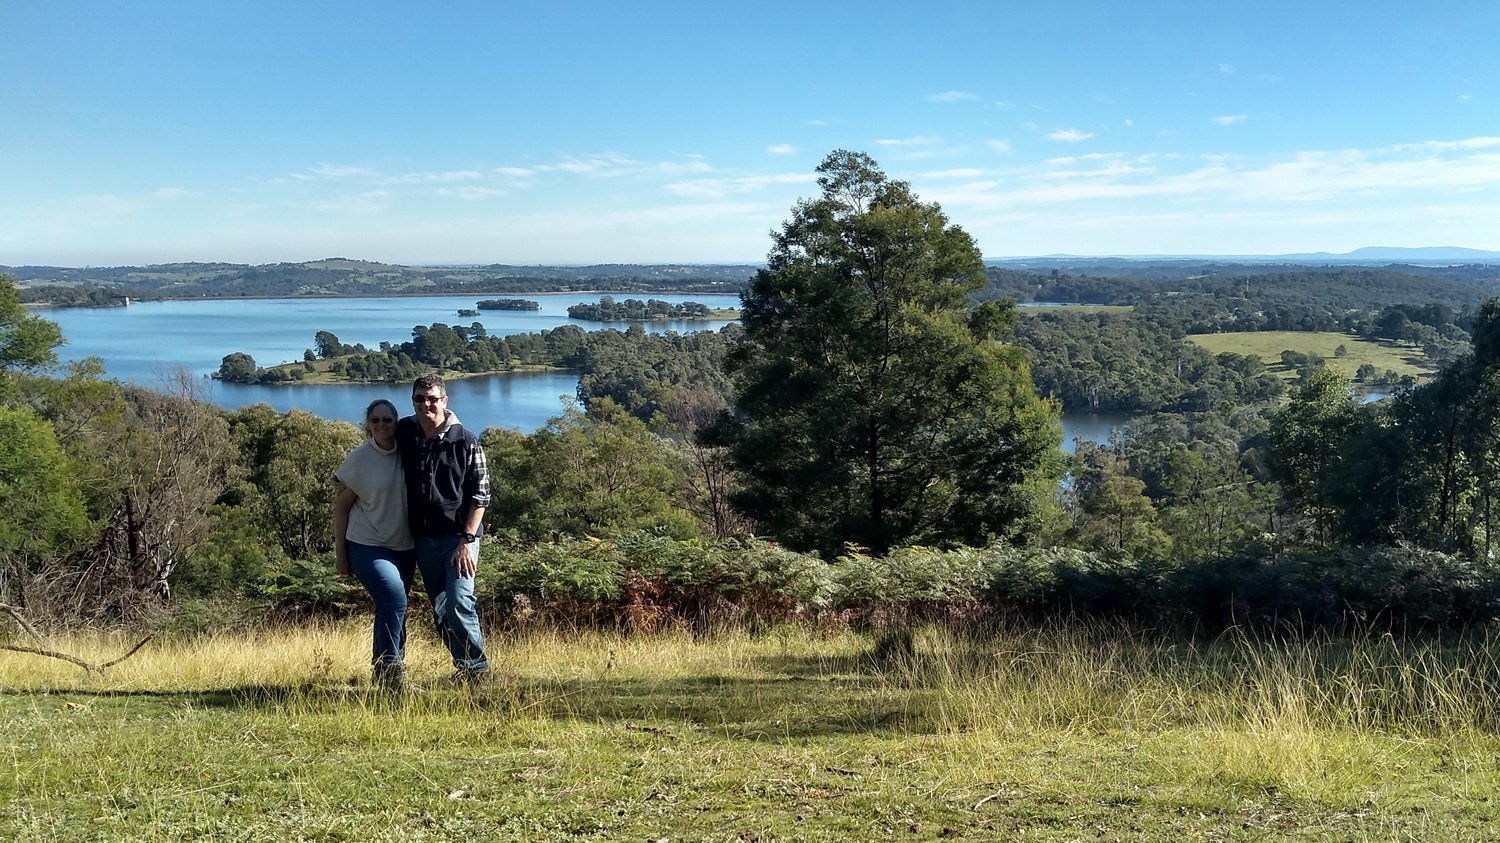 Lunch stop photo. Sugarloaf Reservoir walk, May 2020.